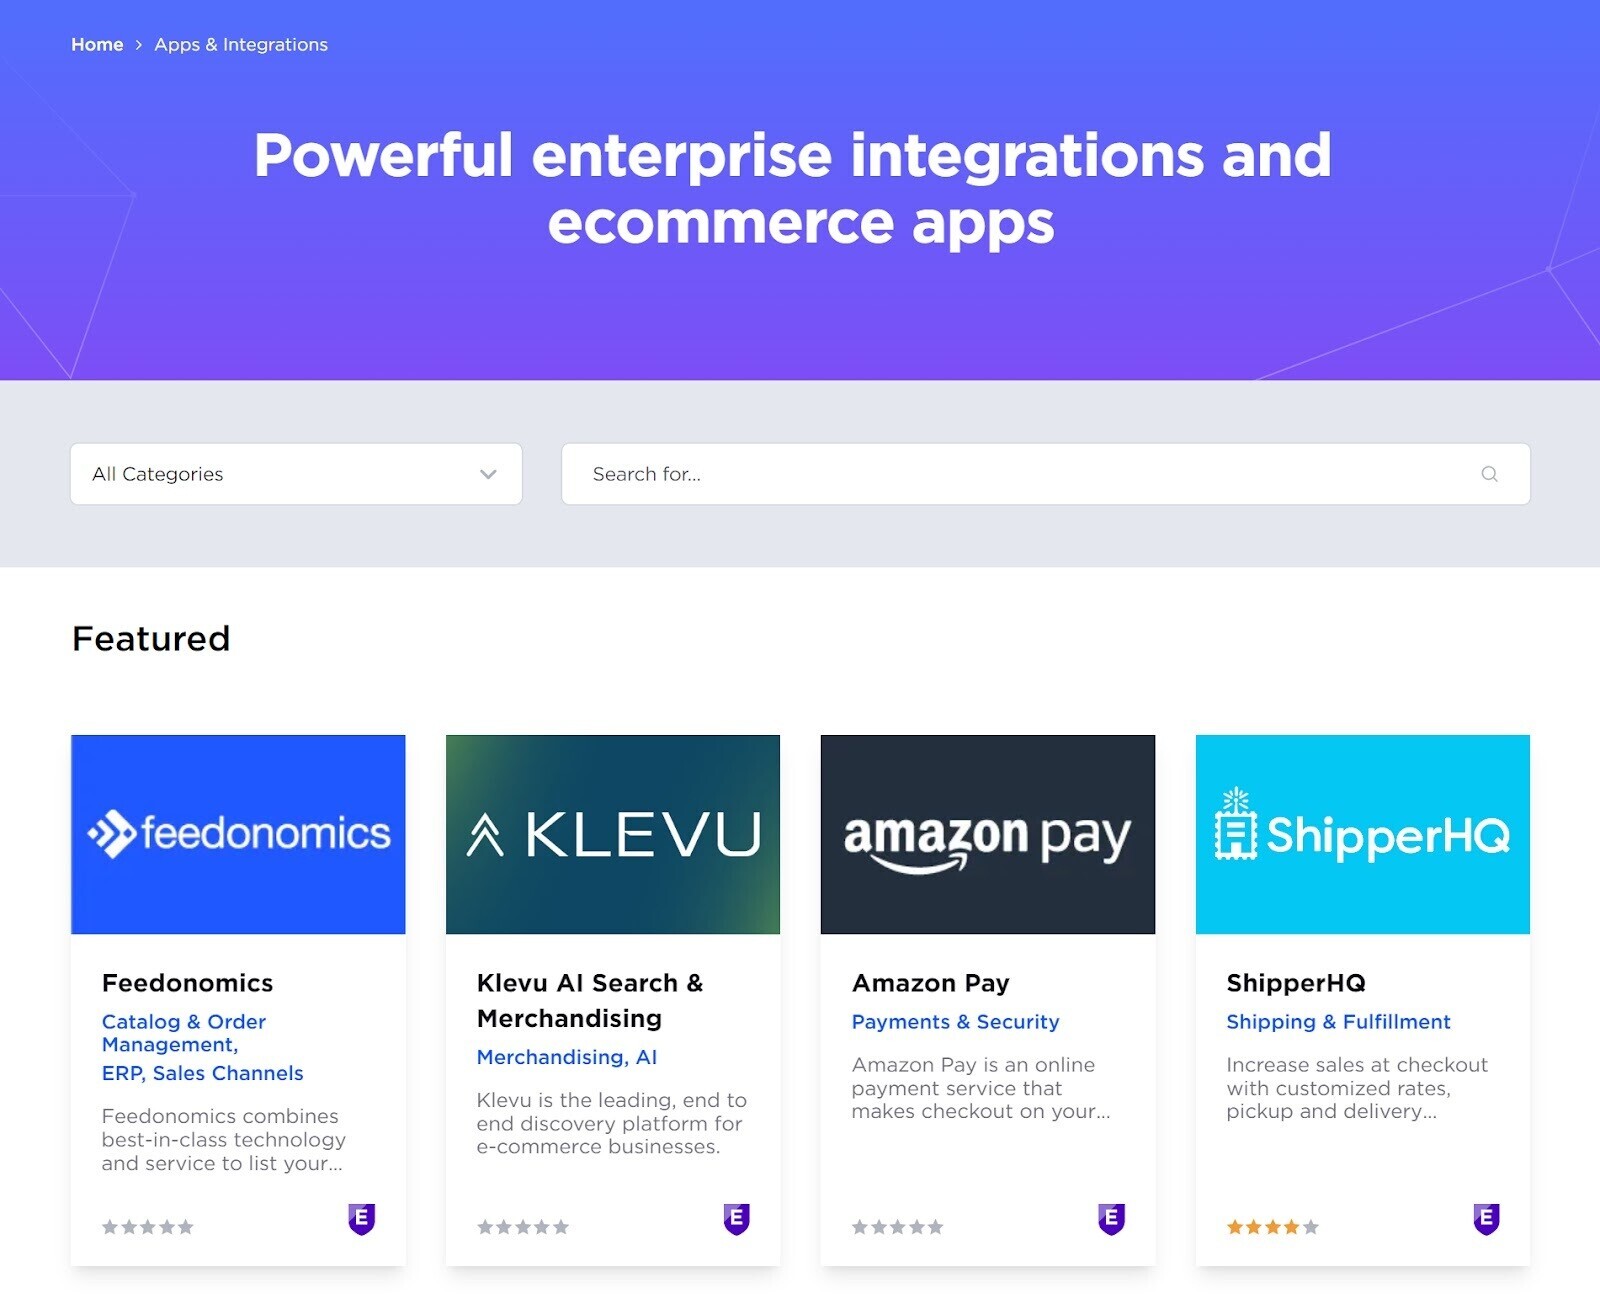 BigCommerce's enterprise integrations and ecommerce apps page